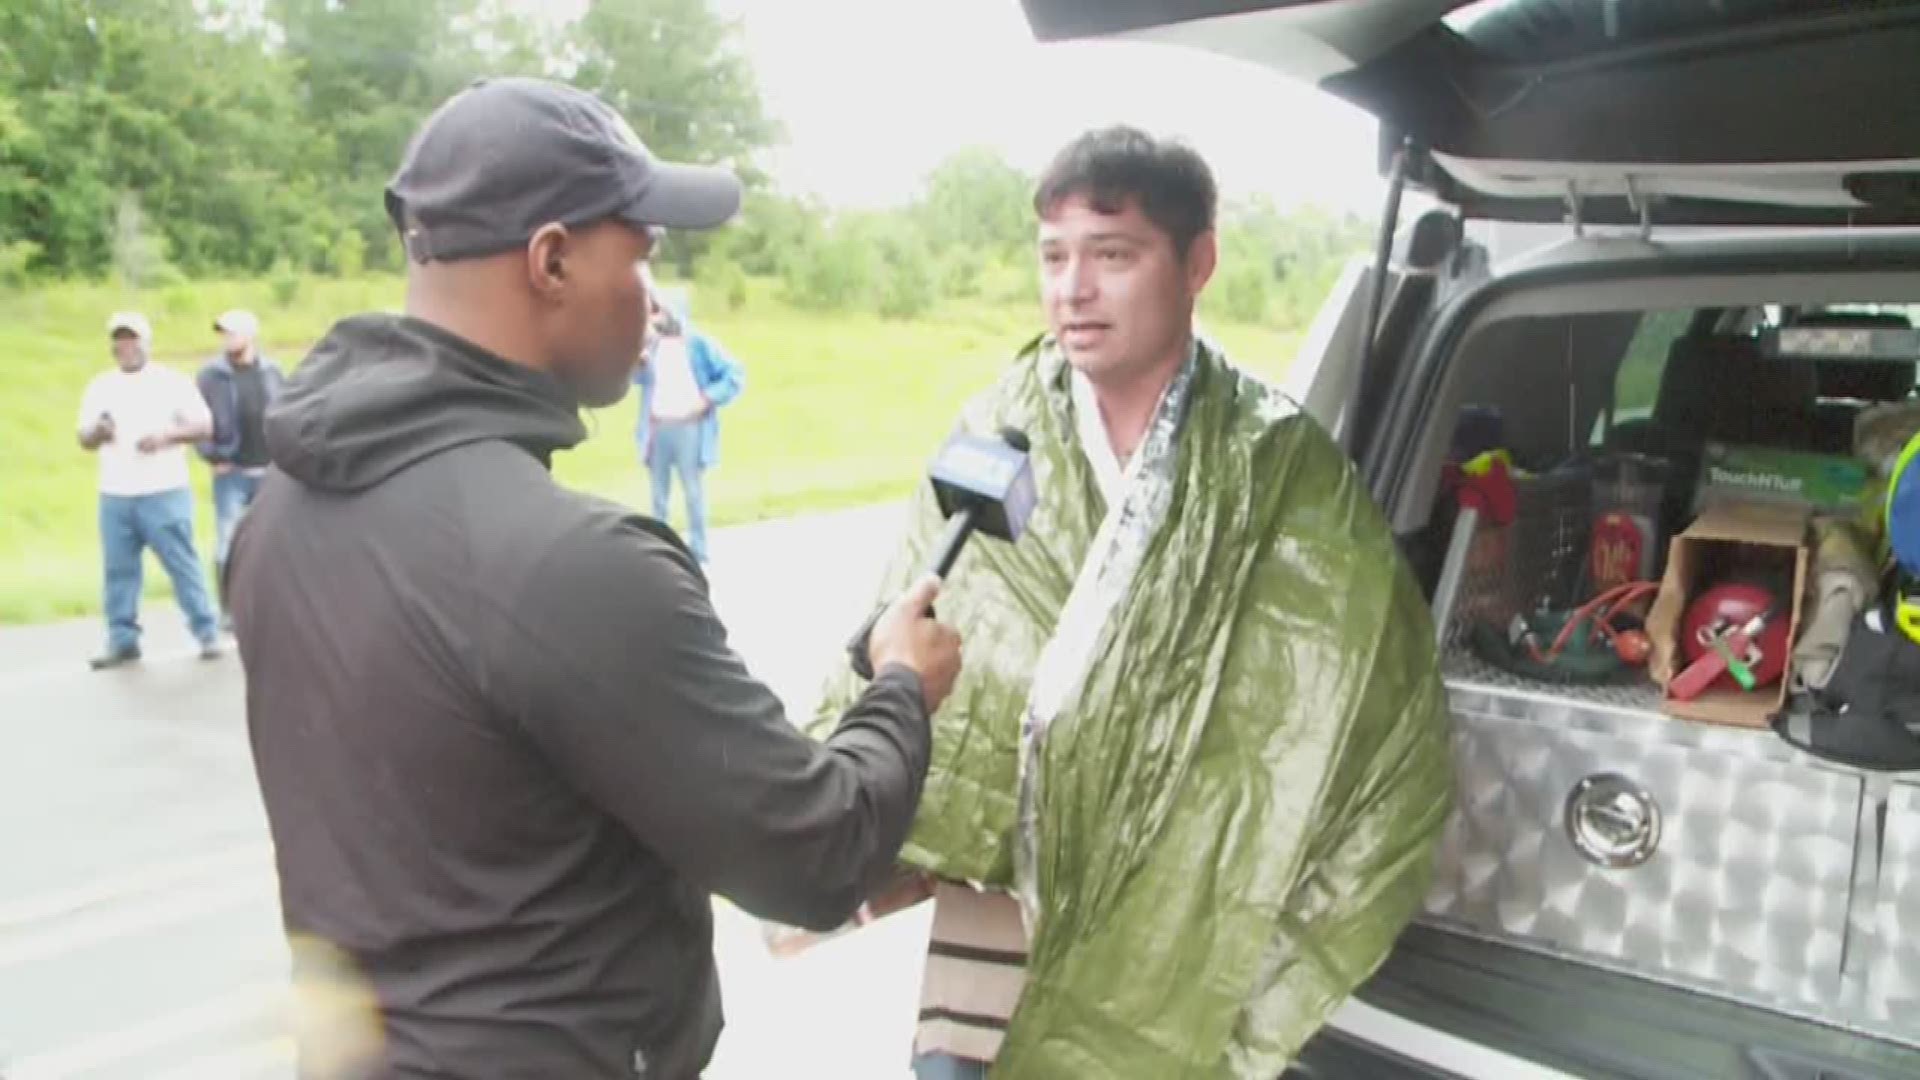 A man trapped by rising flood water in Amite tells his story